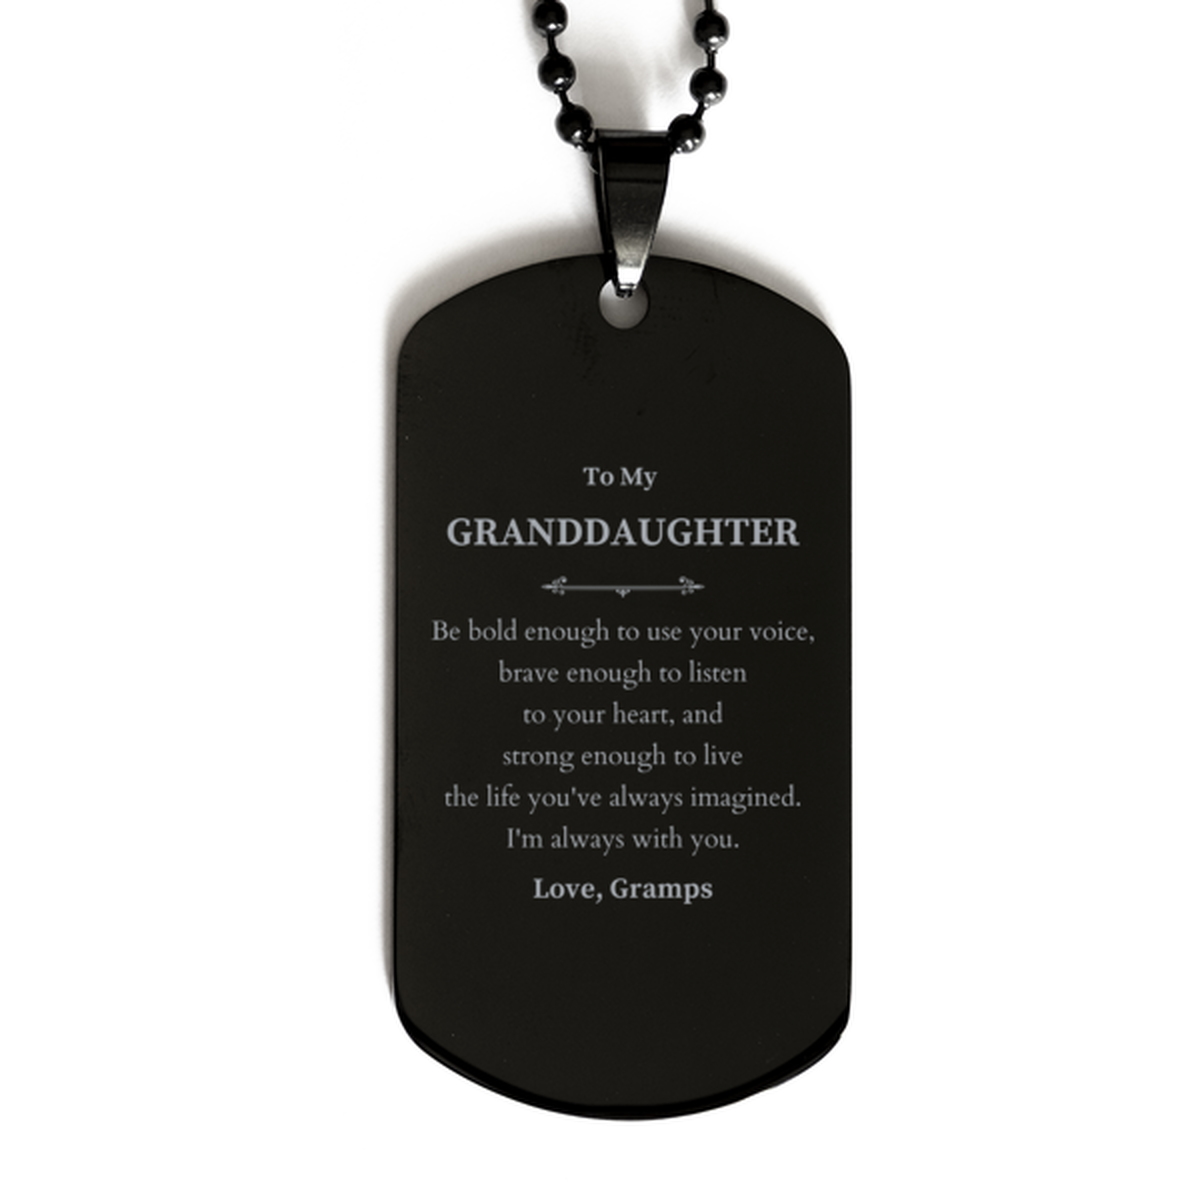 Keepsake Granddaughter Black Dog Tag Gift Idea Graduation Christmas Birthday Granddaughter from Gramps, Granddaughter Be bold enough to use your voice, brave enough to listen to your heart. Love, Gramps